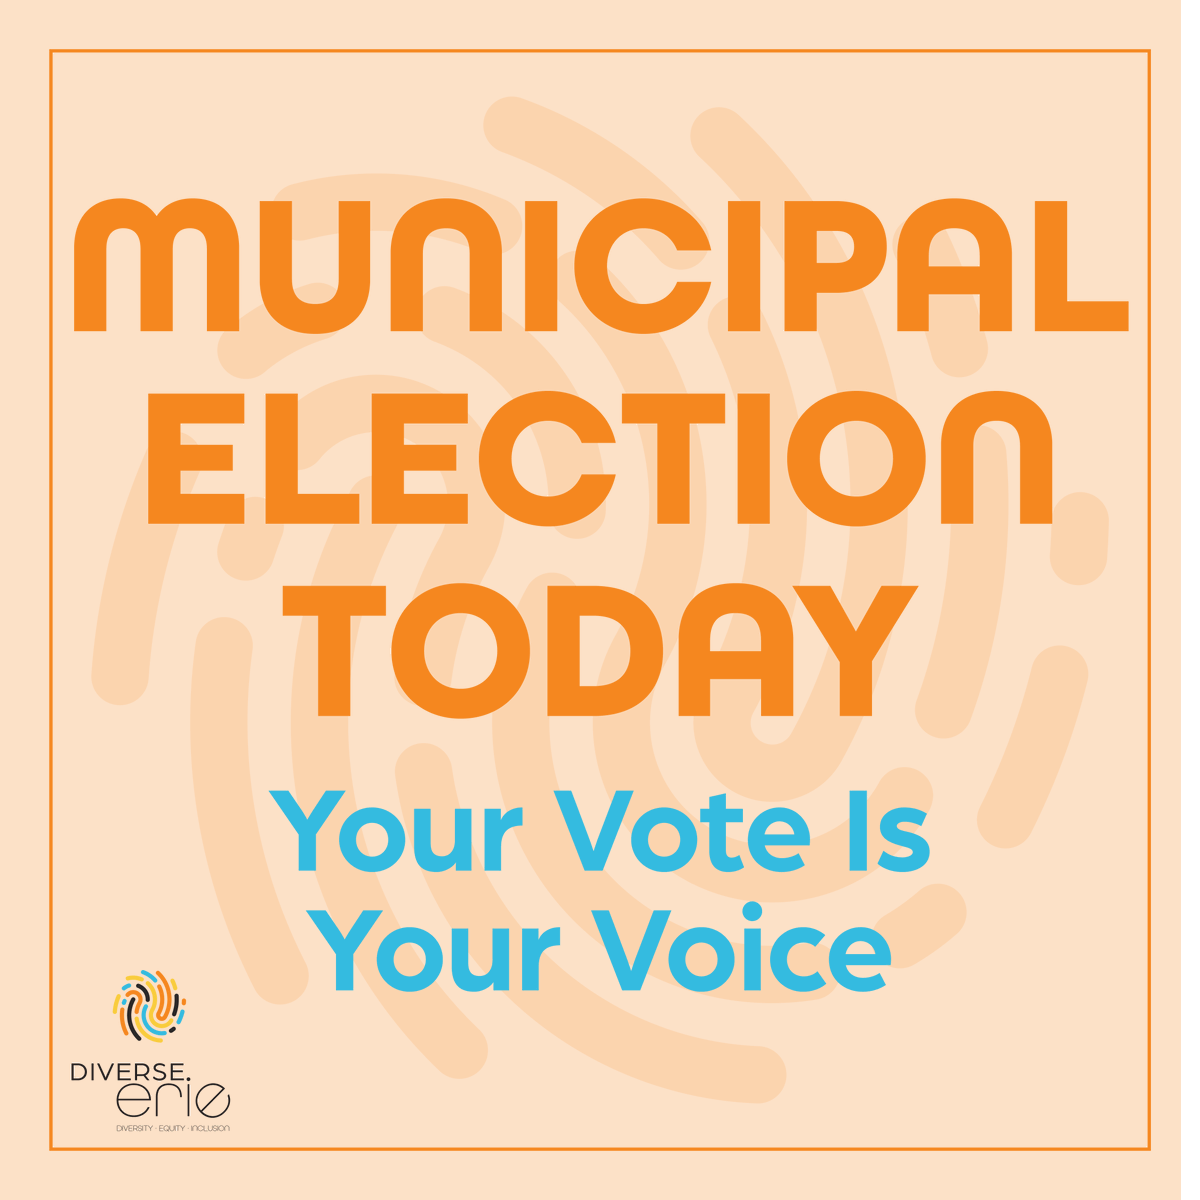 Today is the #MunicipalElection! Get out and #VOTE. 🗳 Polls are open from 7 am to 8 pm. 

REMINDER: Mail-in and absentee ballots must be received by your county election office before 8:00 p.m. TODAY.

Find your polling place here: ow.ly/9xGV50Q1w8V